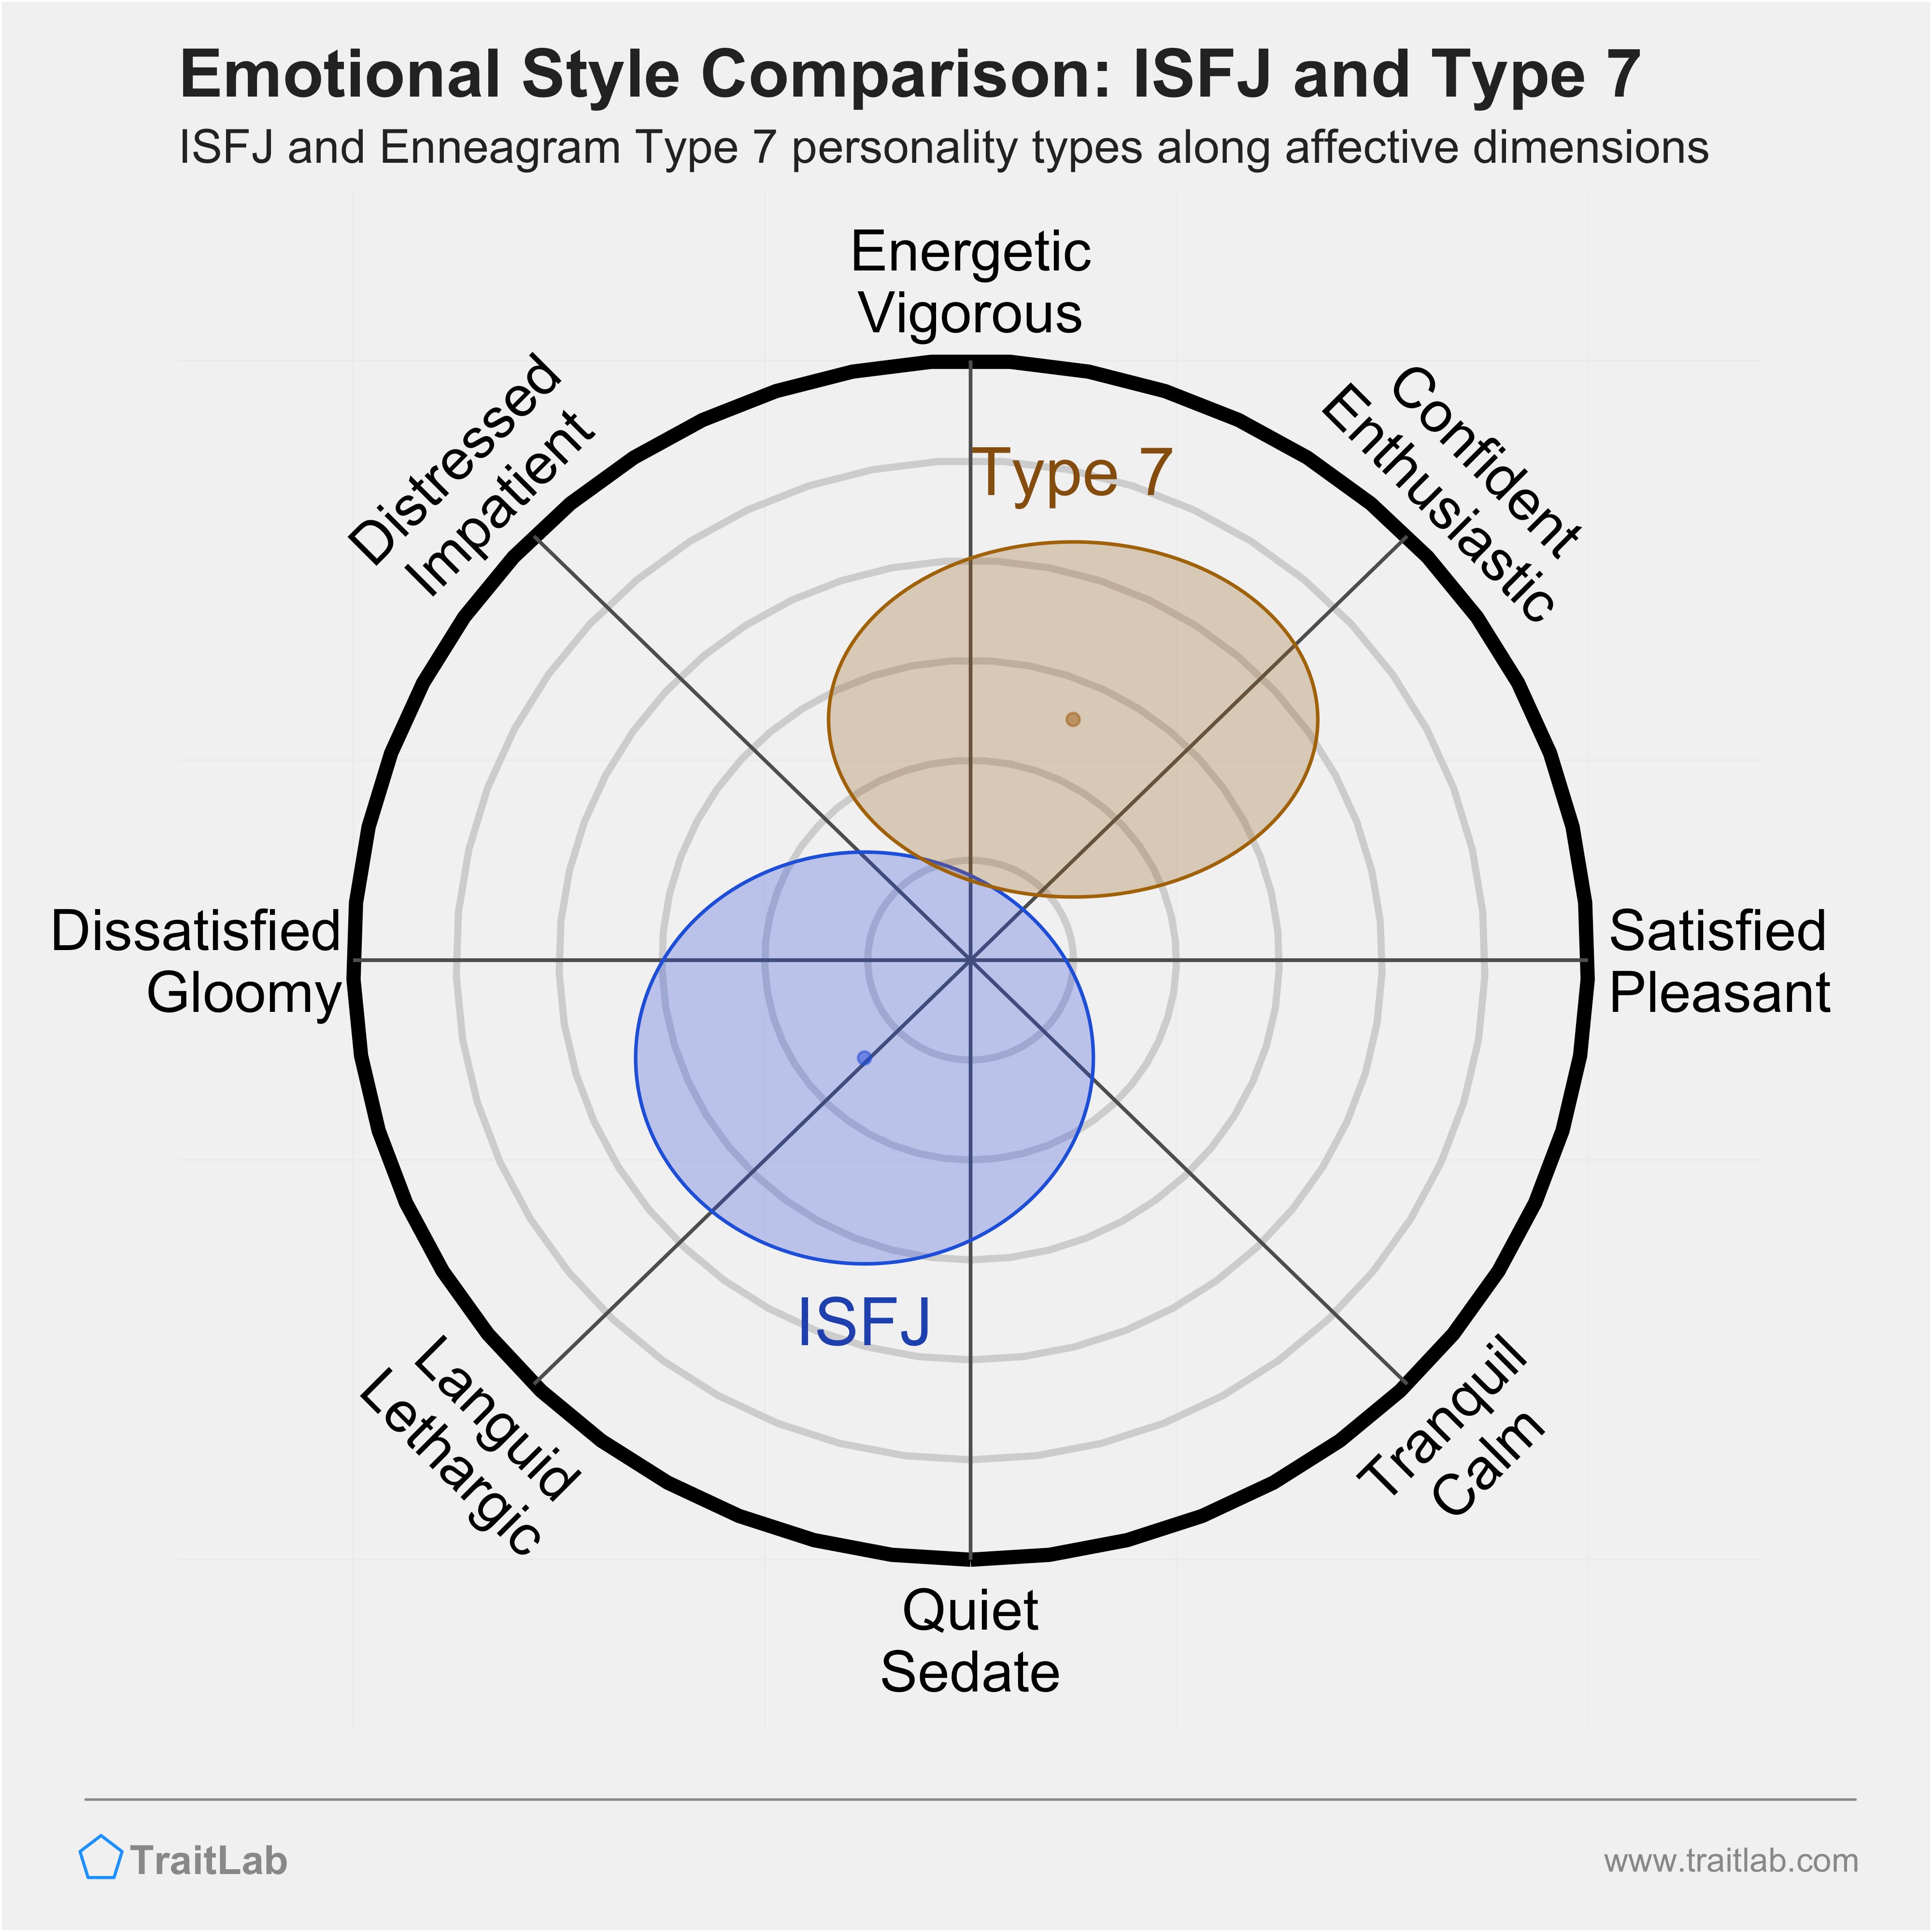 ISFJ and Type 7 comparison across emotional (affective) dimensions